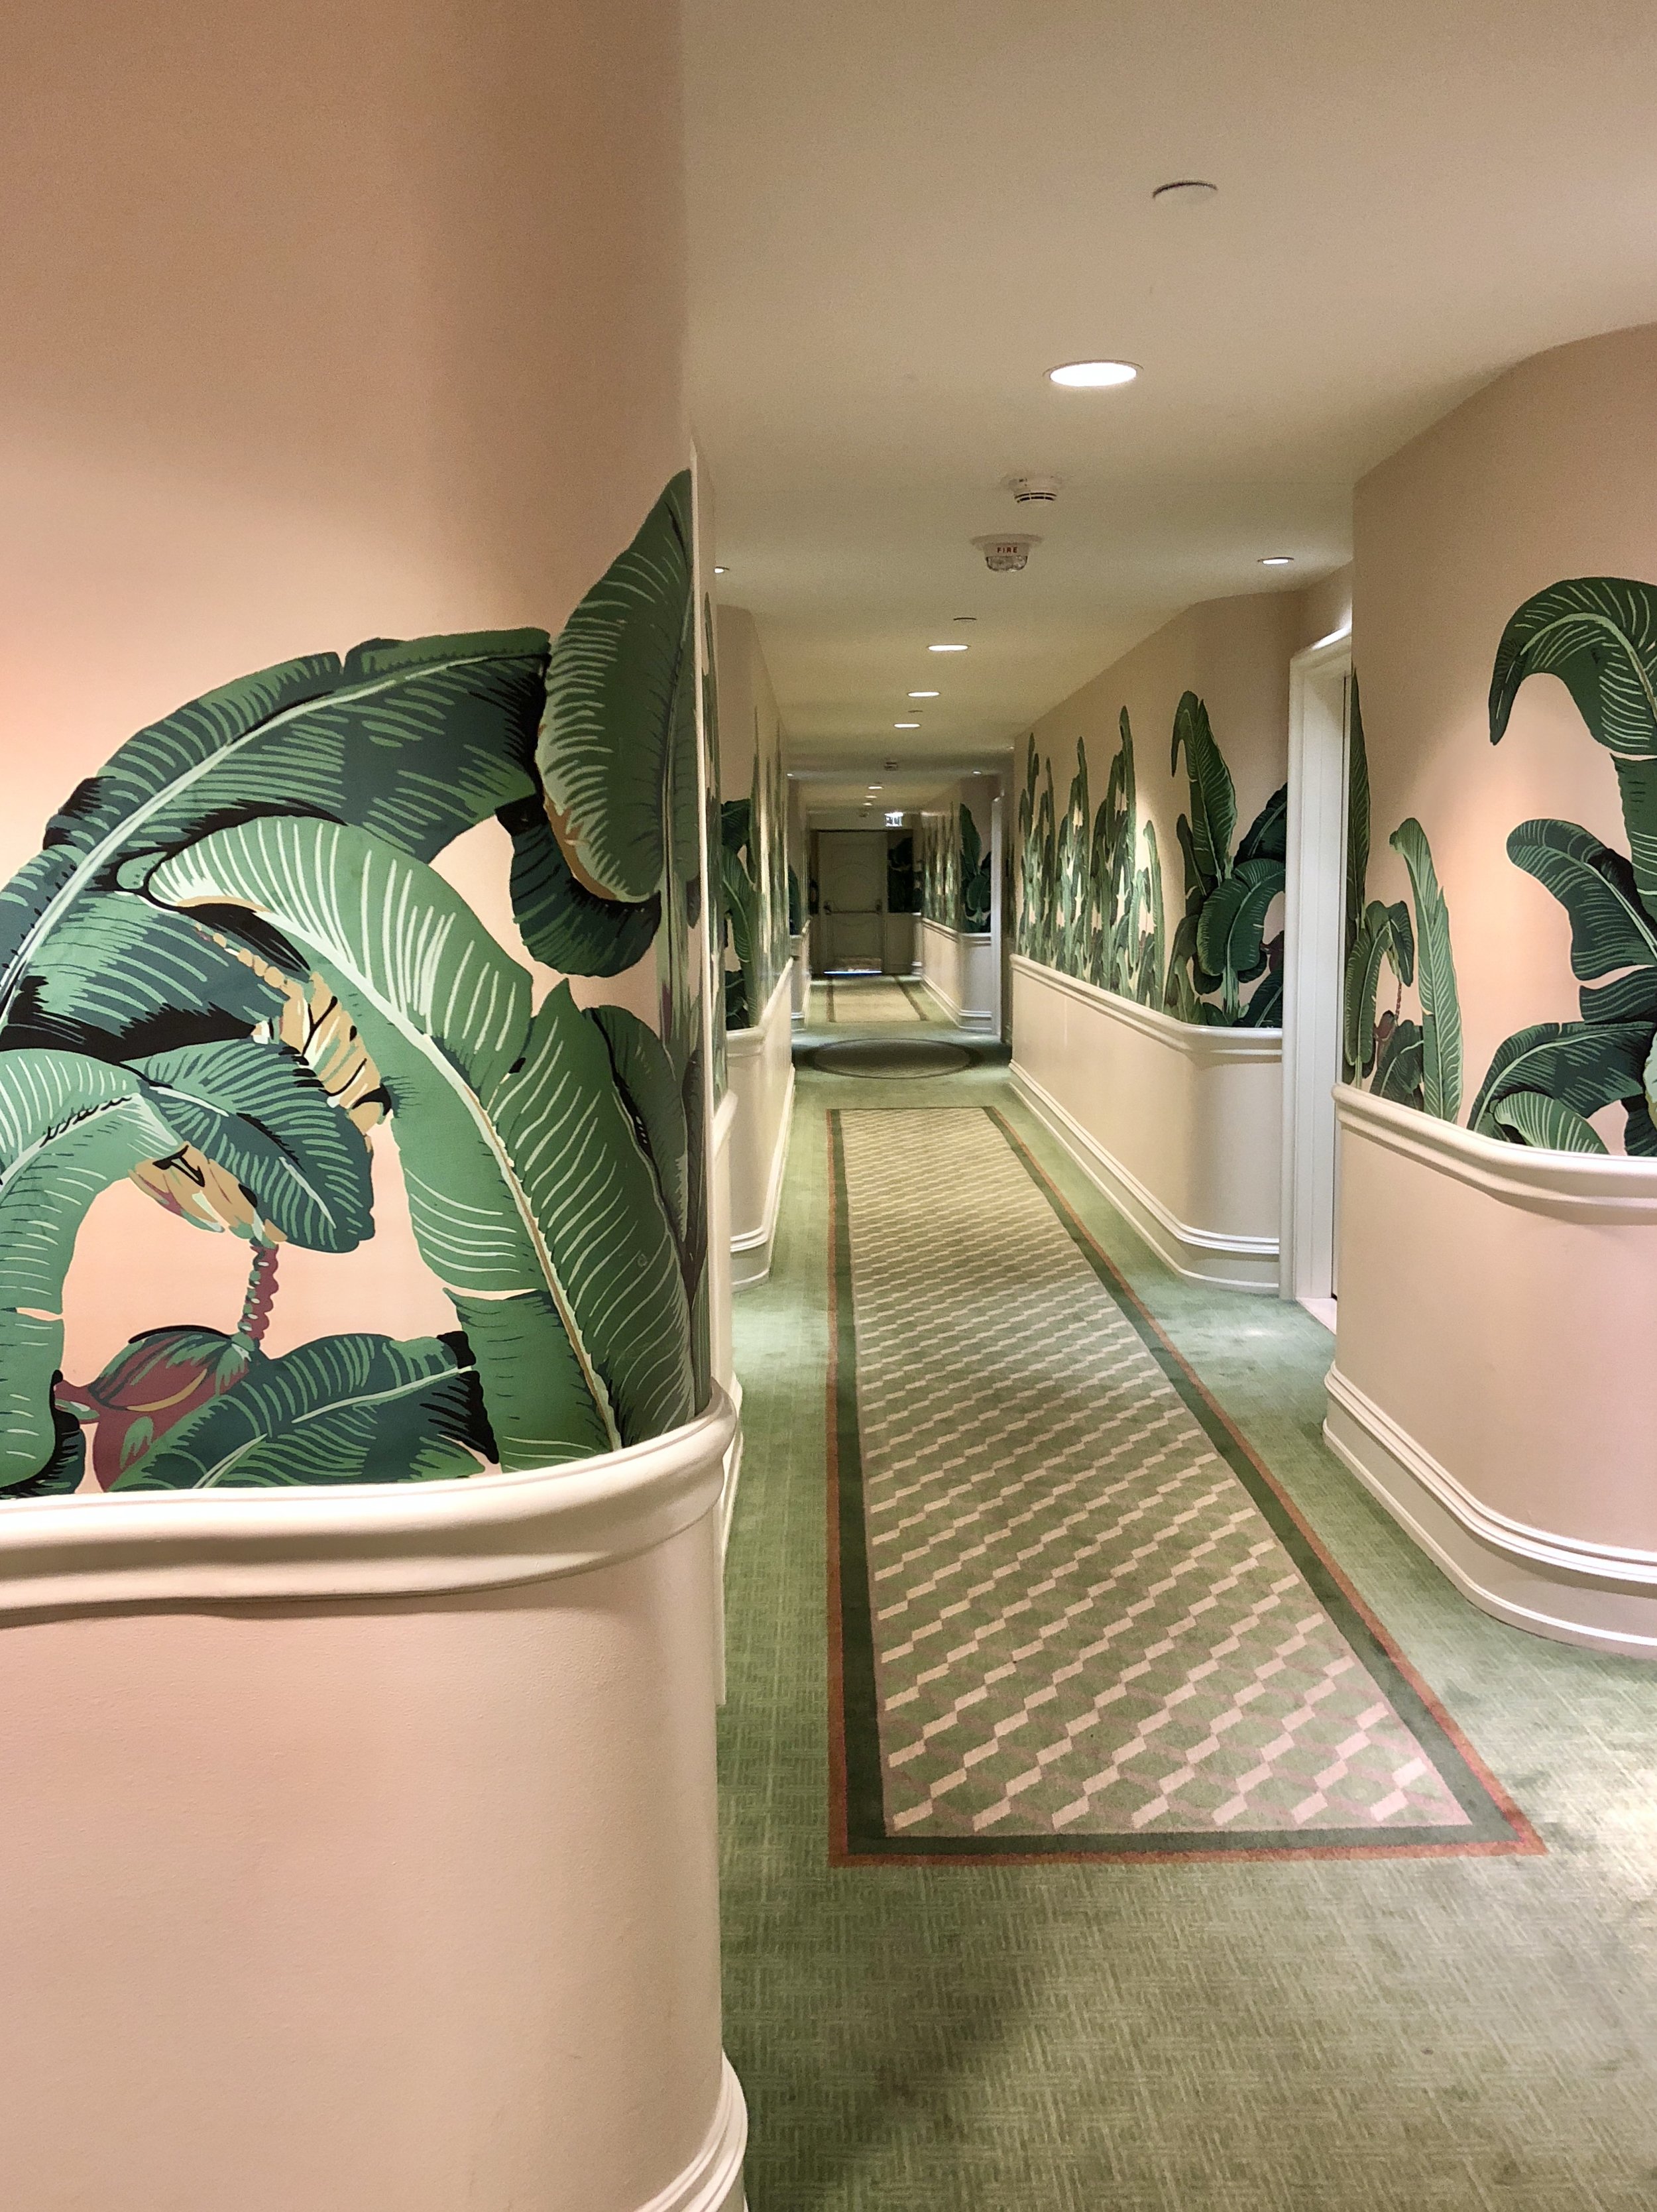 Authentic Martinique Wallpaper Beverly Hills Banana Leaf Wallpaper  Dutch  Hospital Luxury Lifestyle